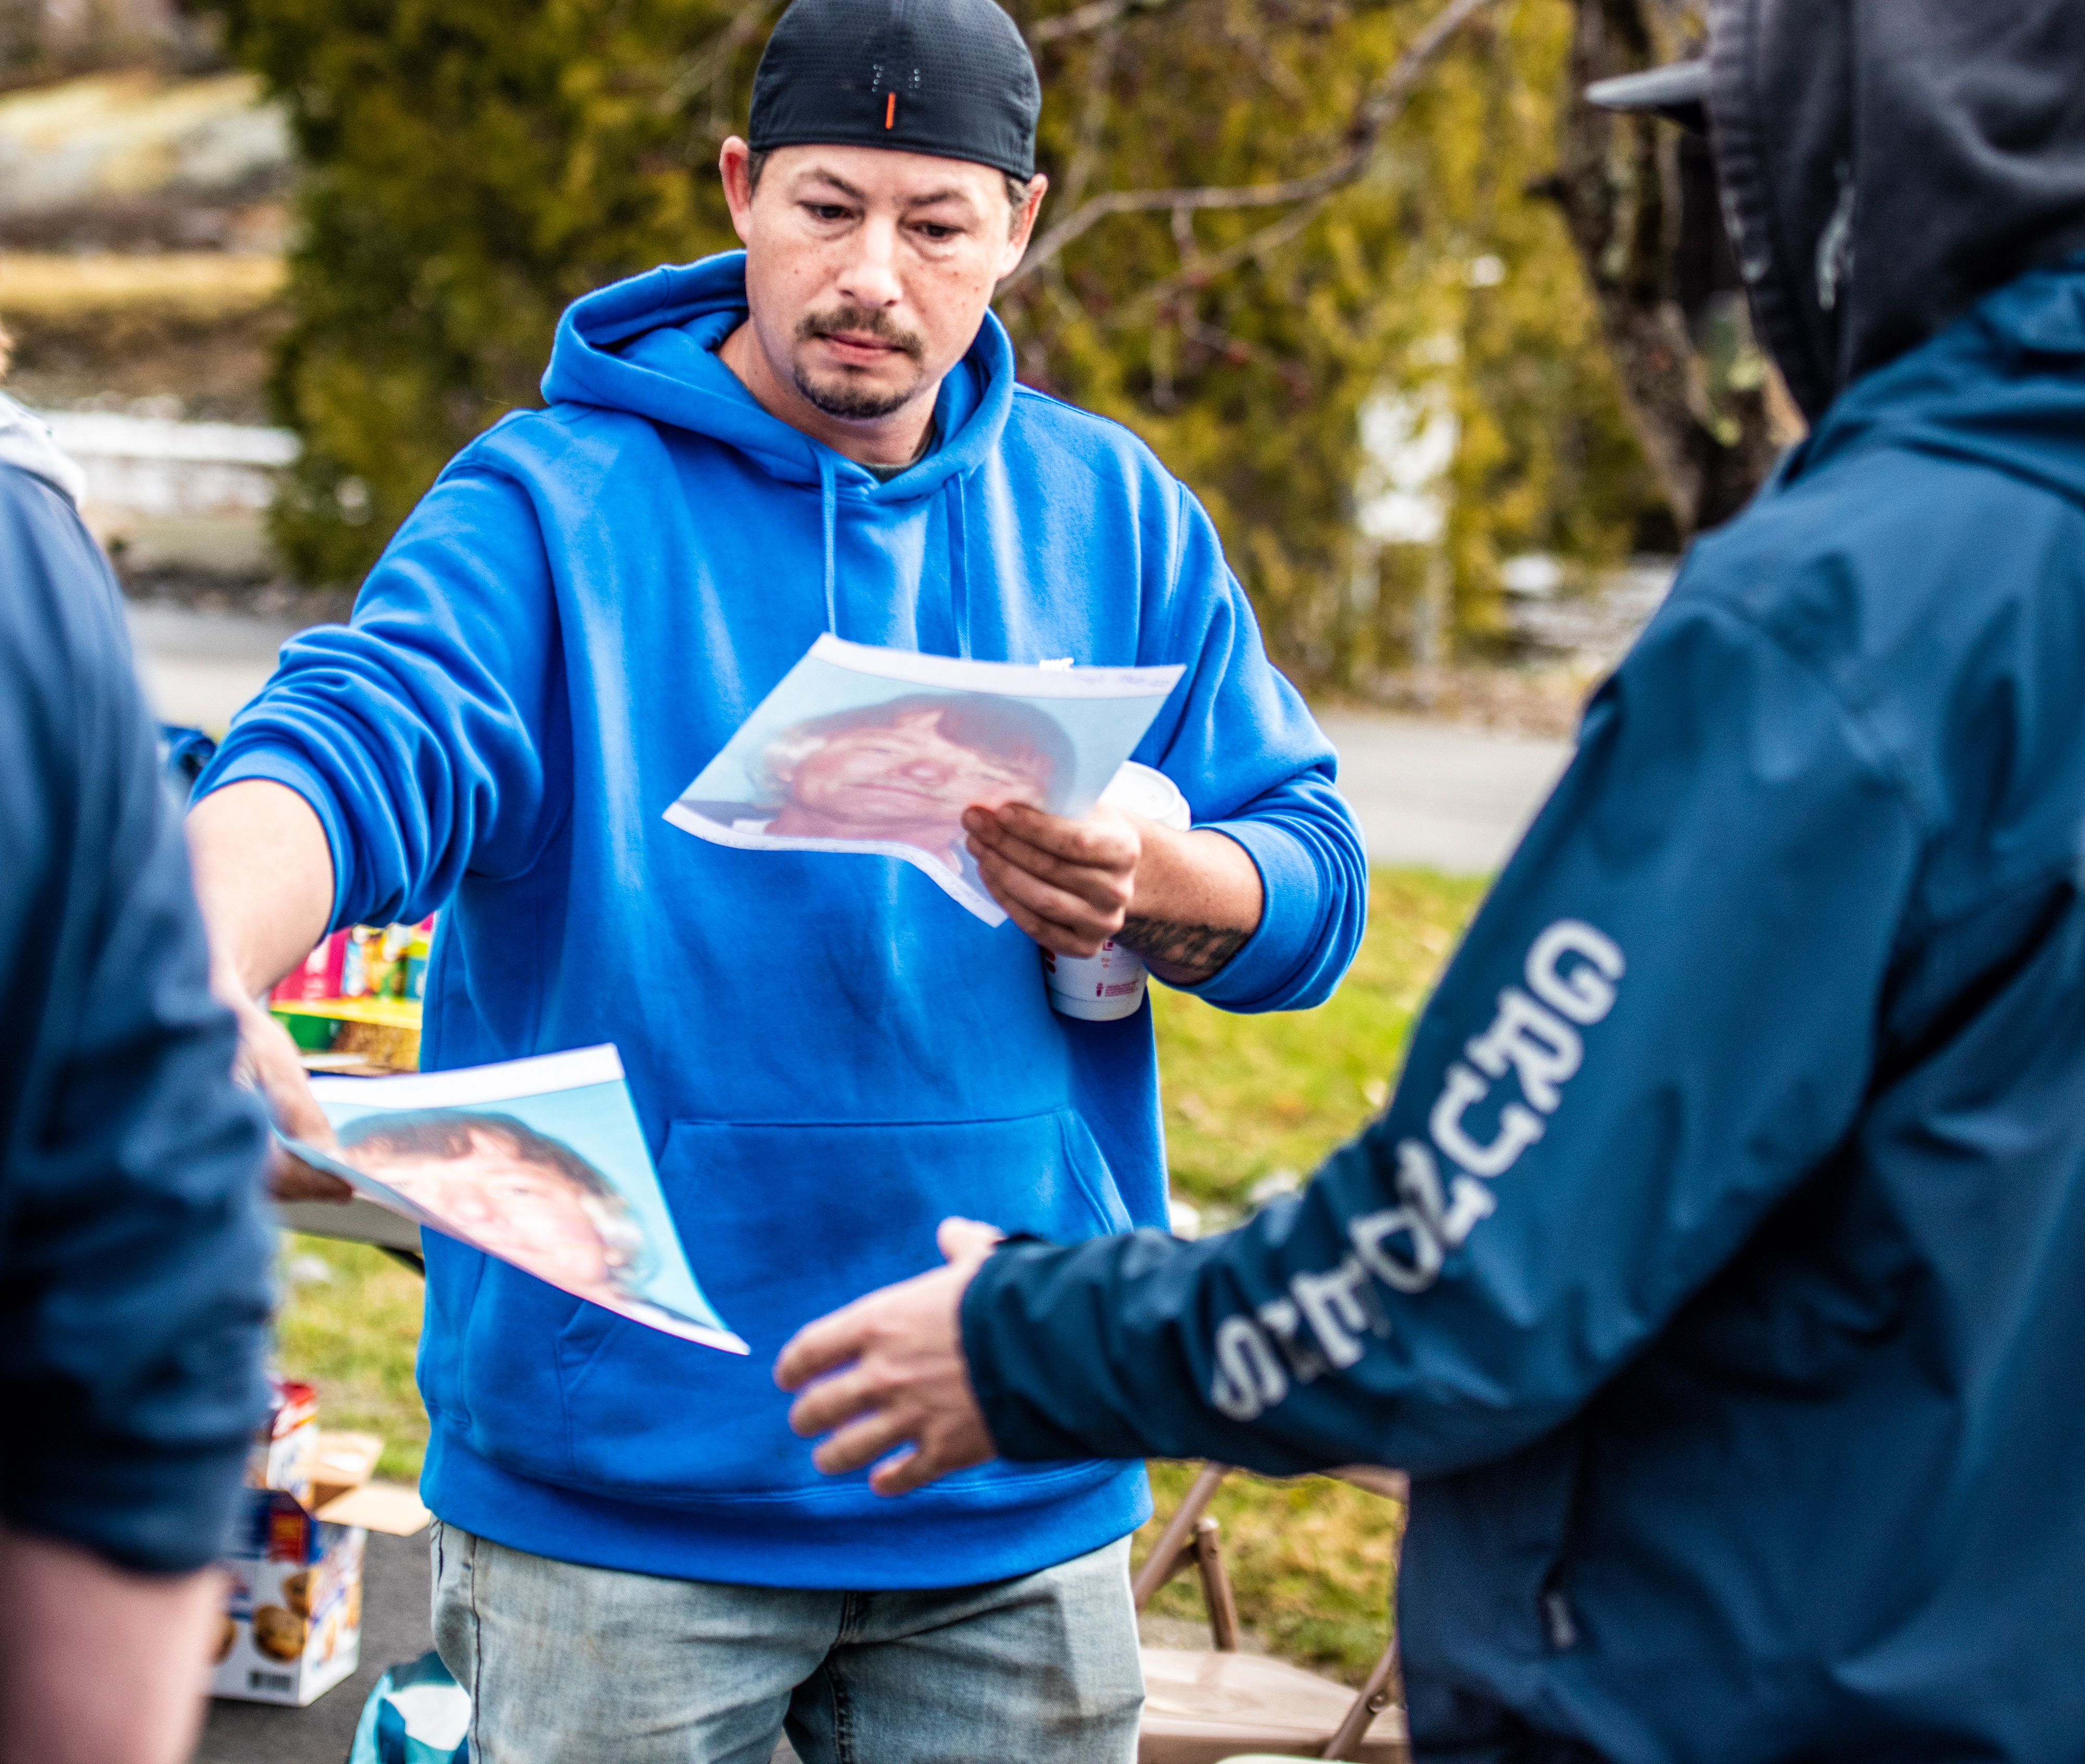 Jimmy Wellman hands out fliers with photos of Doug Barter during a search for the missing man in Waldoboro on April 9. (Bisi Cameron Yee photo)